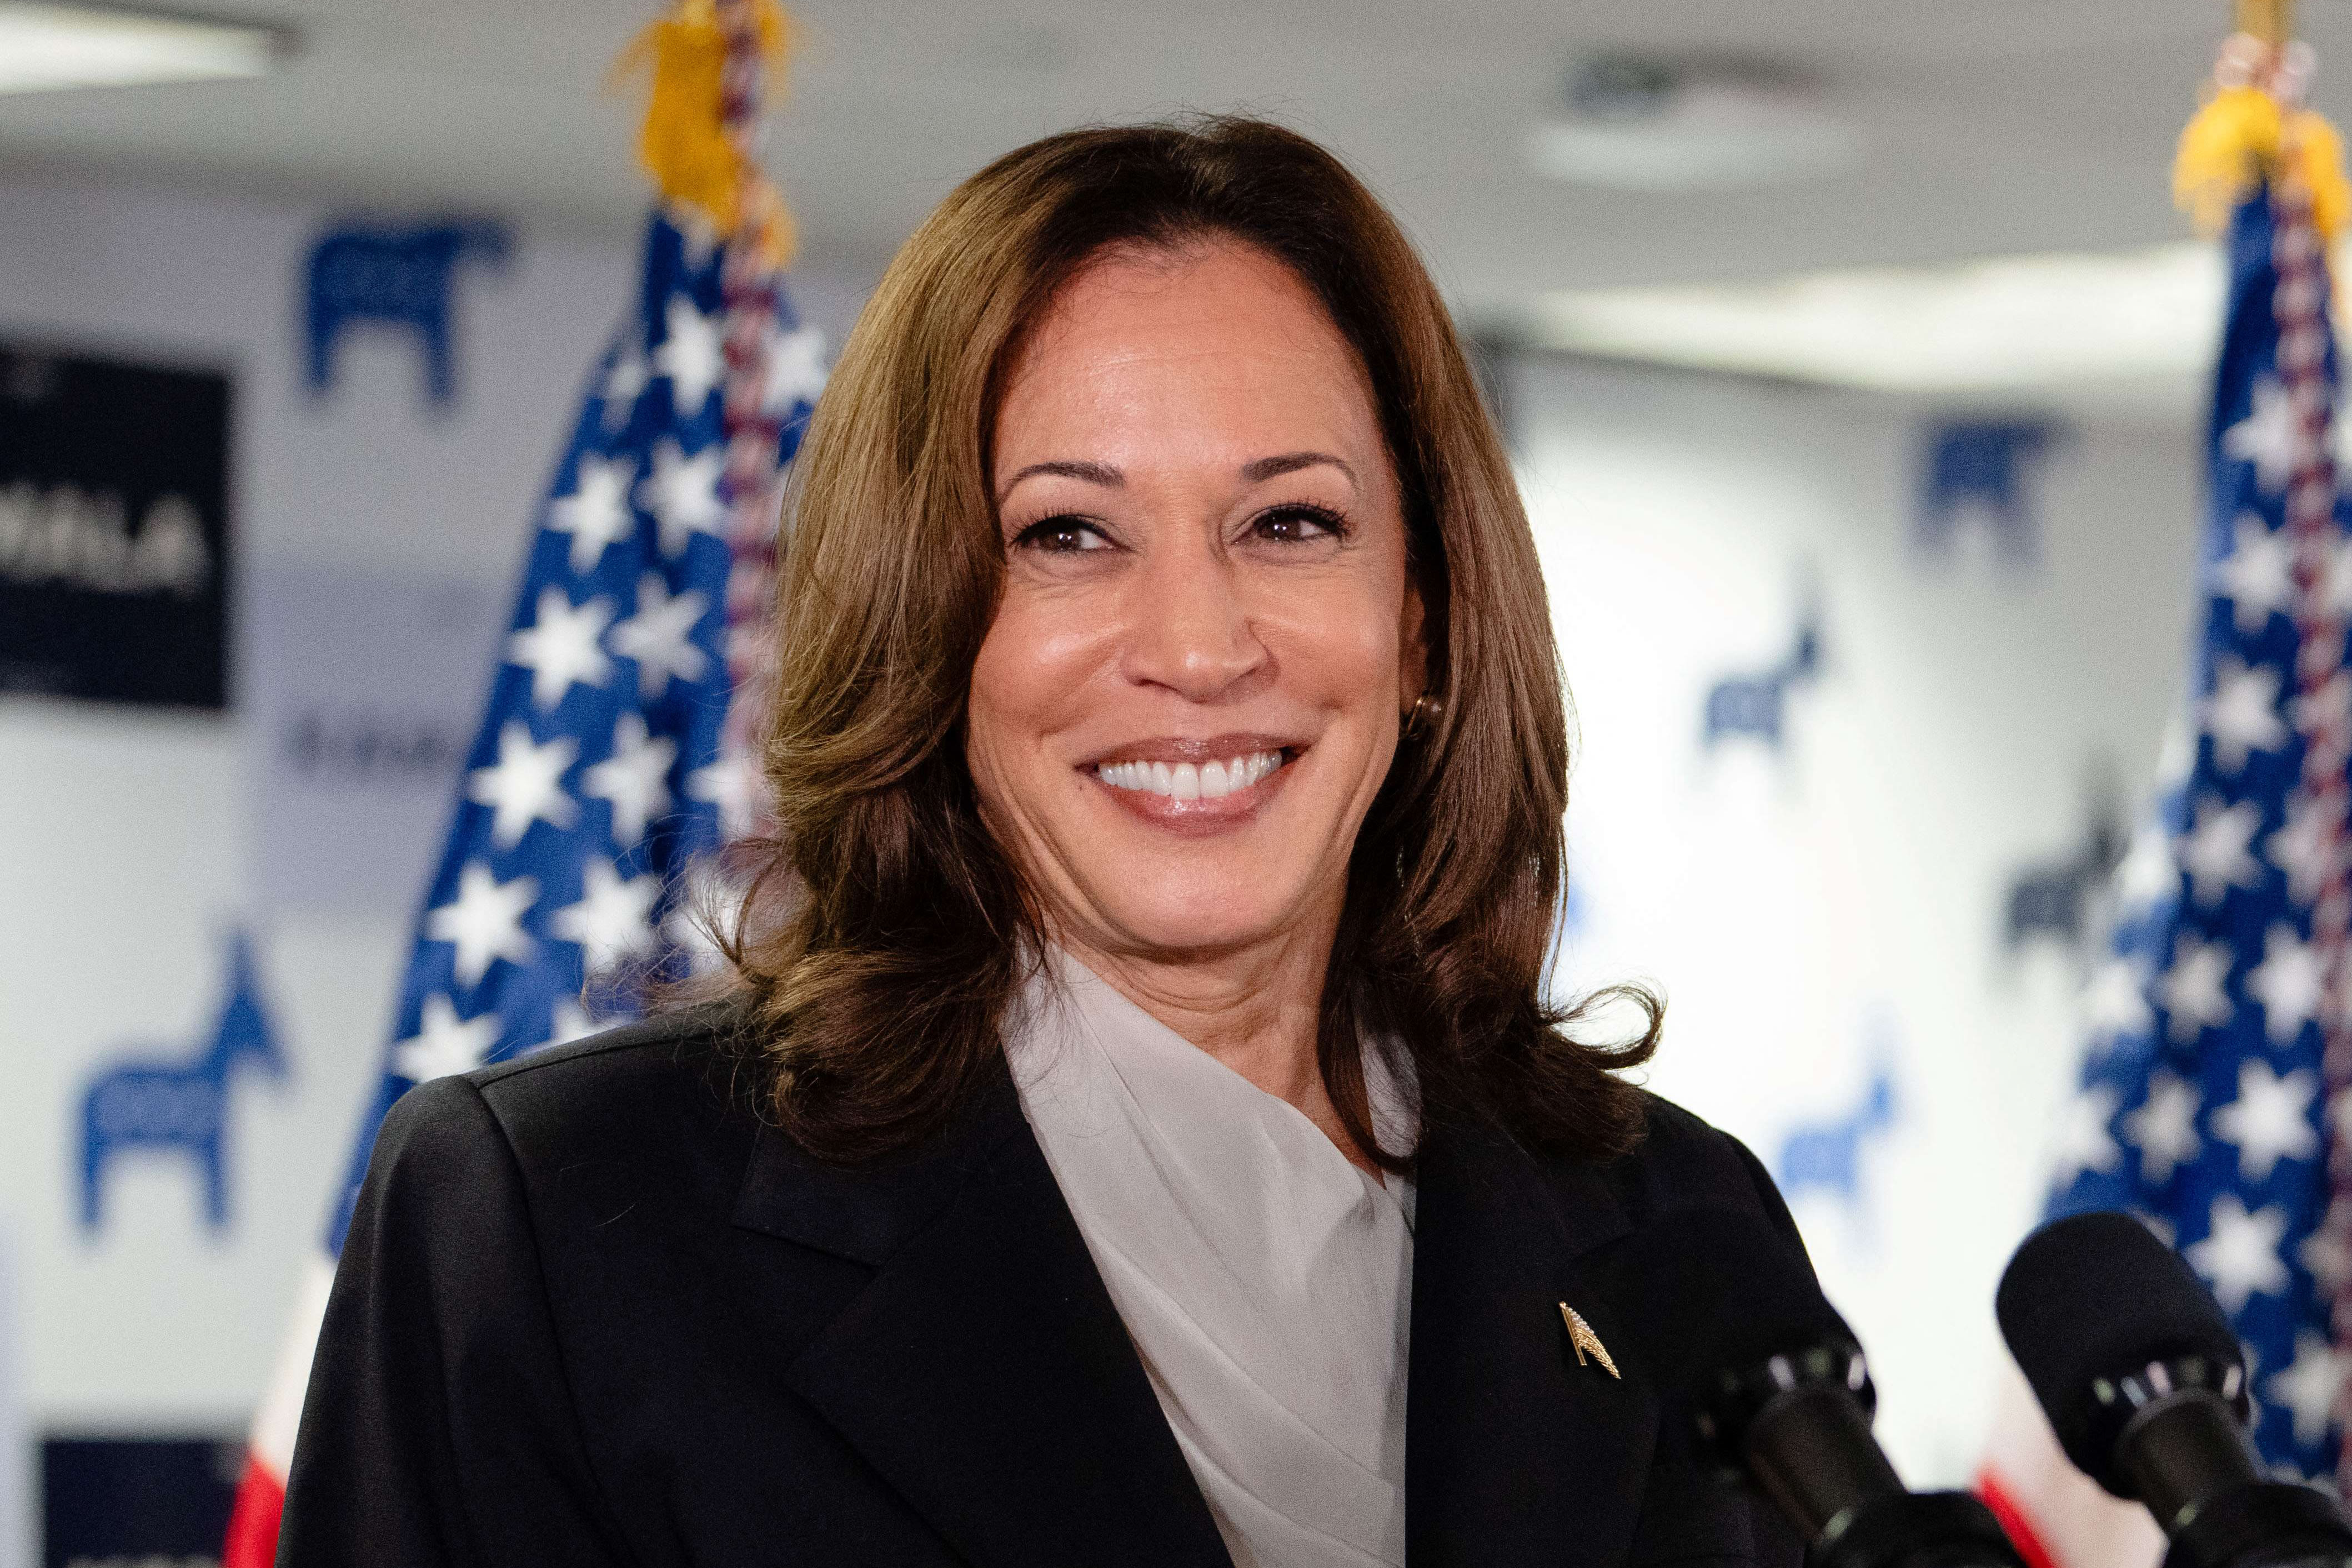 New Yahoo News/YouGov poll: Kamala Harris has a huge head start for the Democratic nomination — and the strongest numbers against Trump